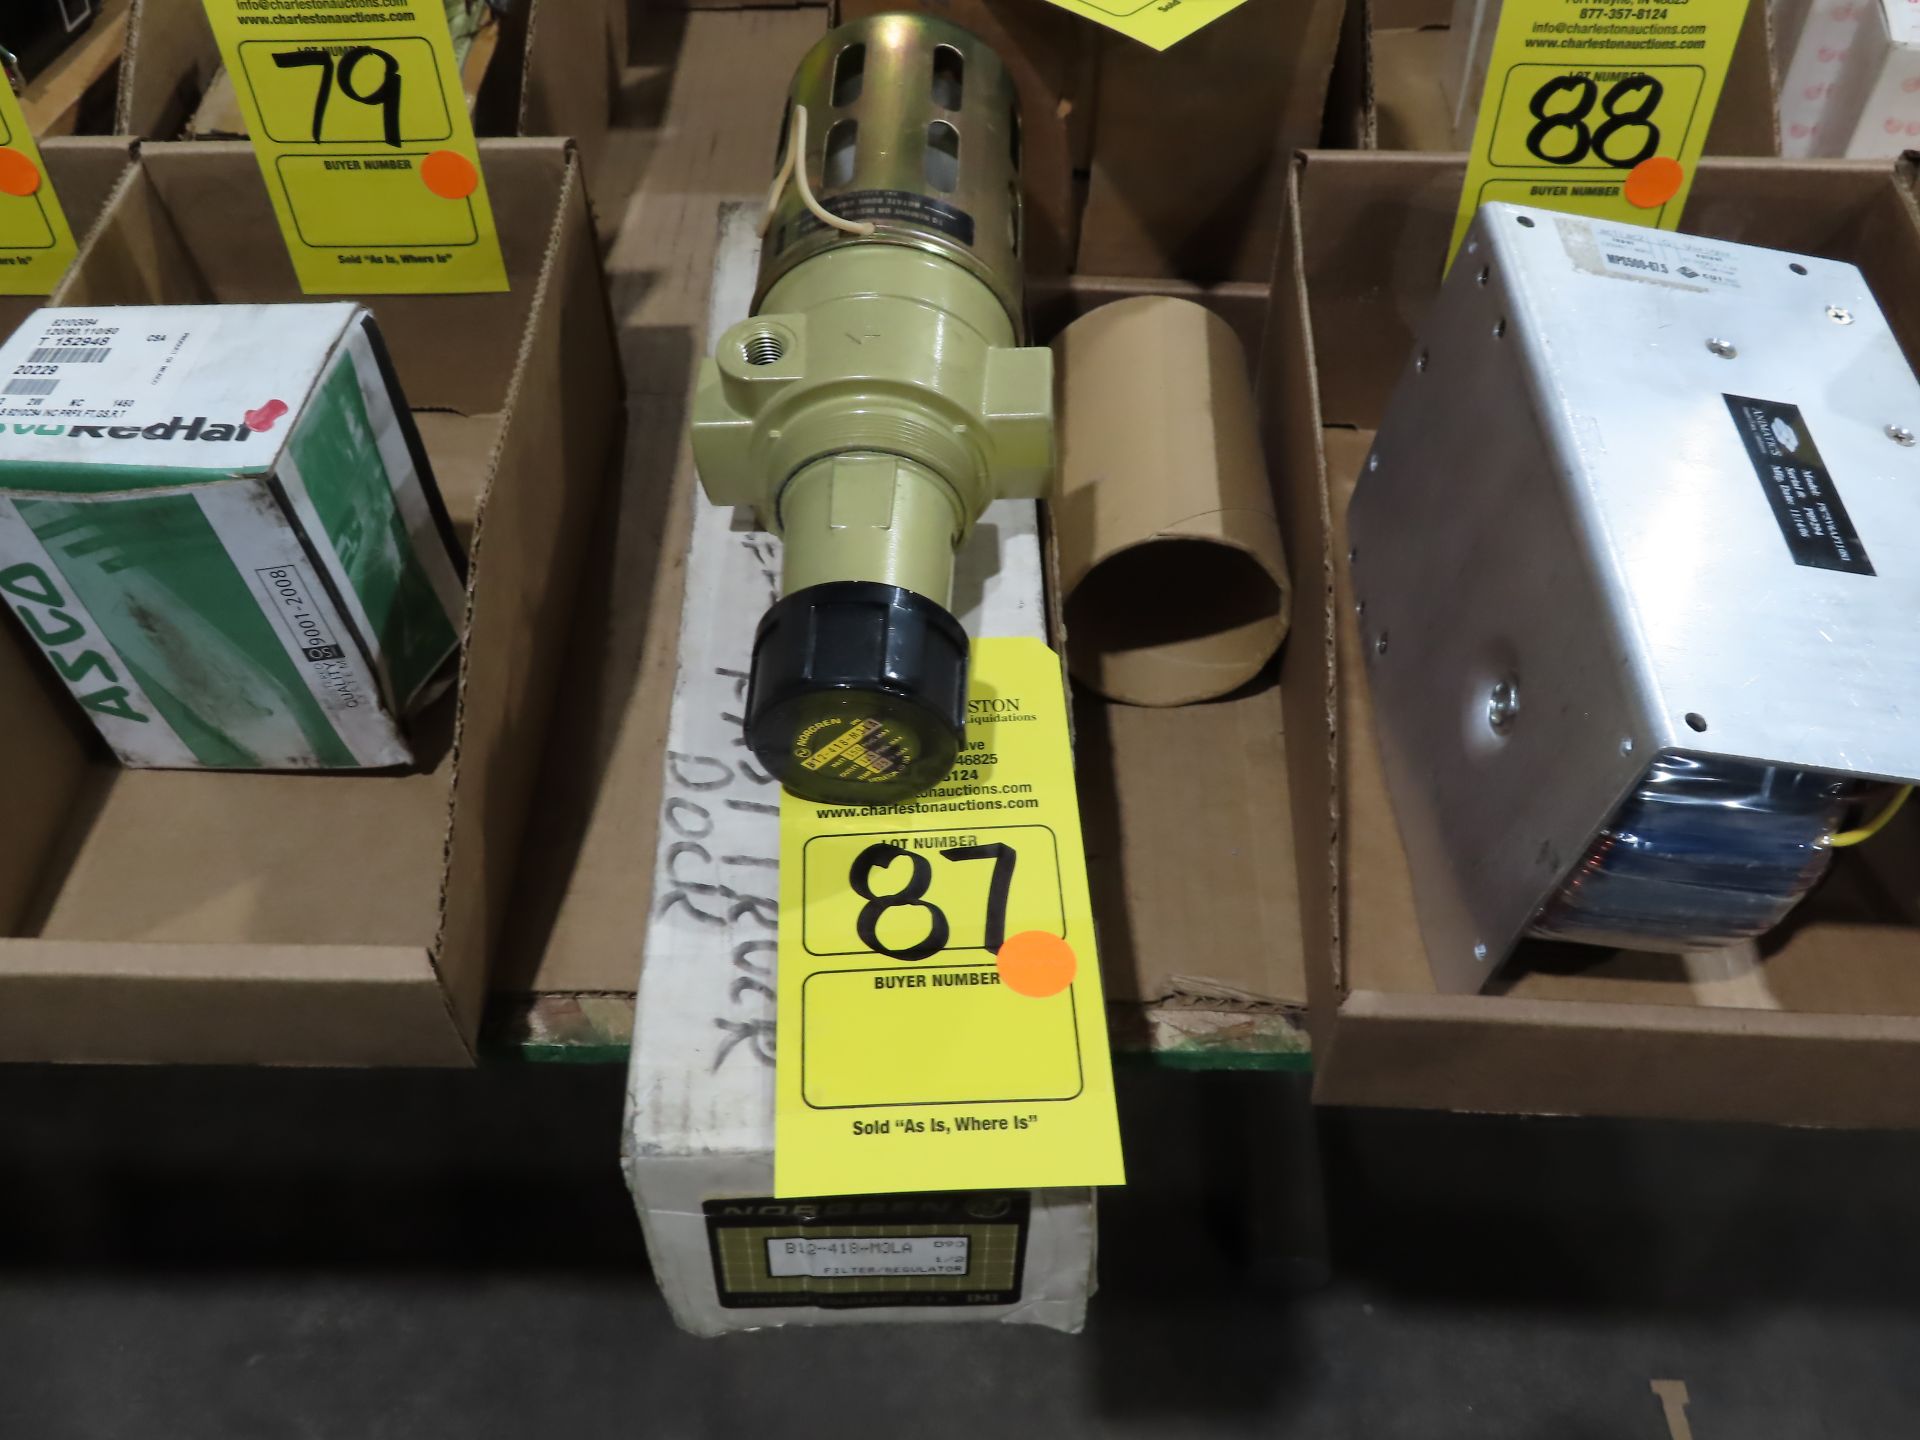 Norgren model B12-418-M3LA, new in box, as always with Brolyn LLC auctions, all lots can be picked